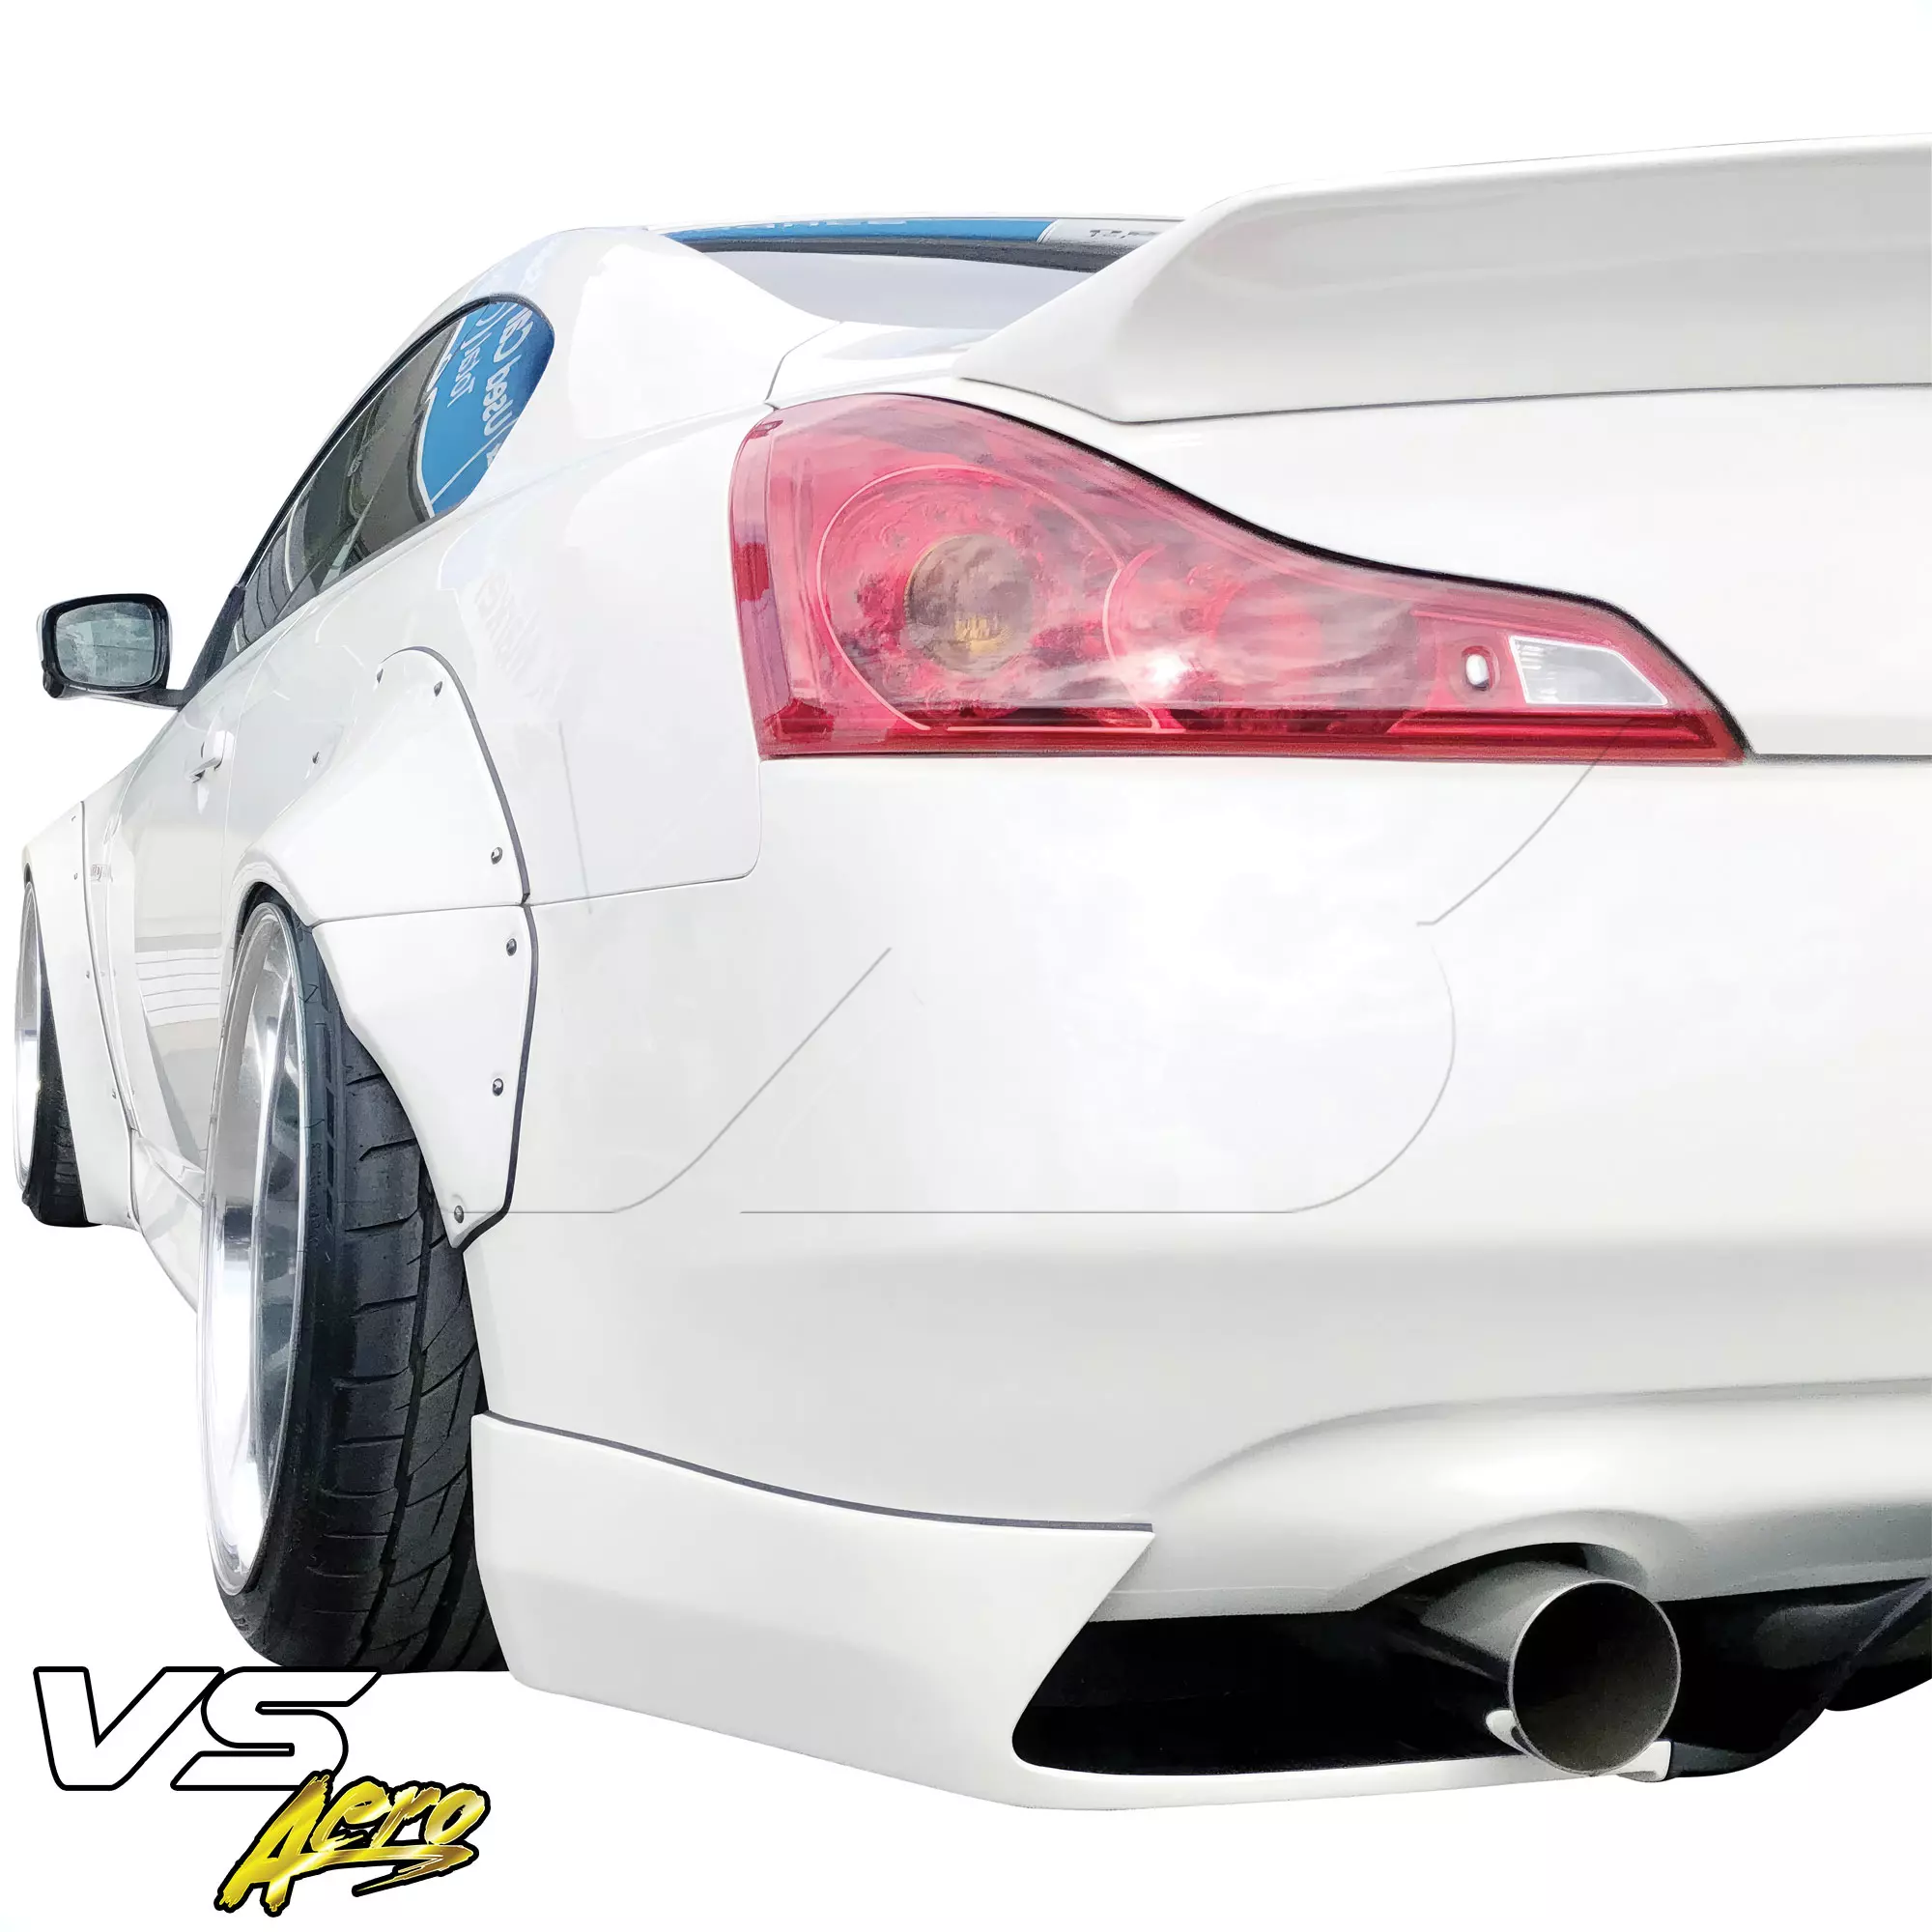 VSaero FRP LBPE Wide Body Fender Flares (rear) 4pc > Infiniti G37 Coupe 2008-2015 > 2dr Coupe - Image 6